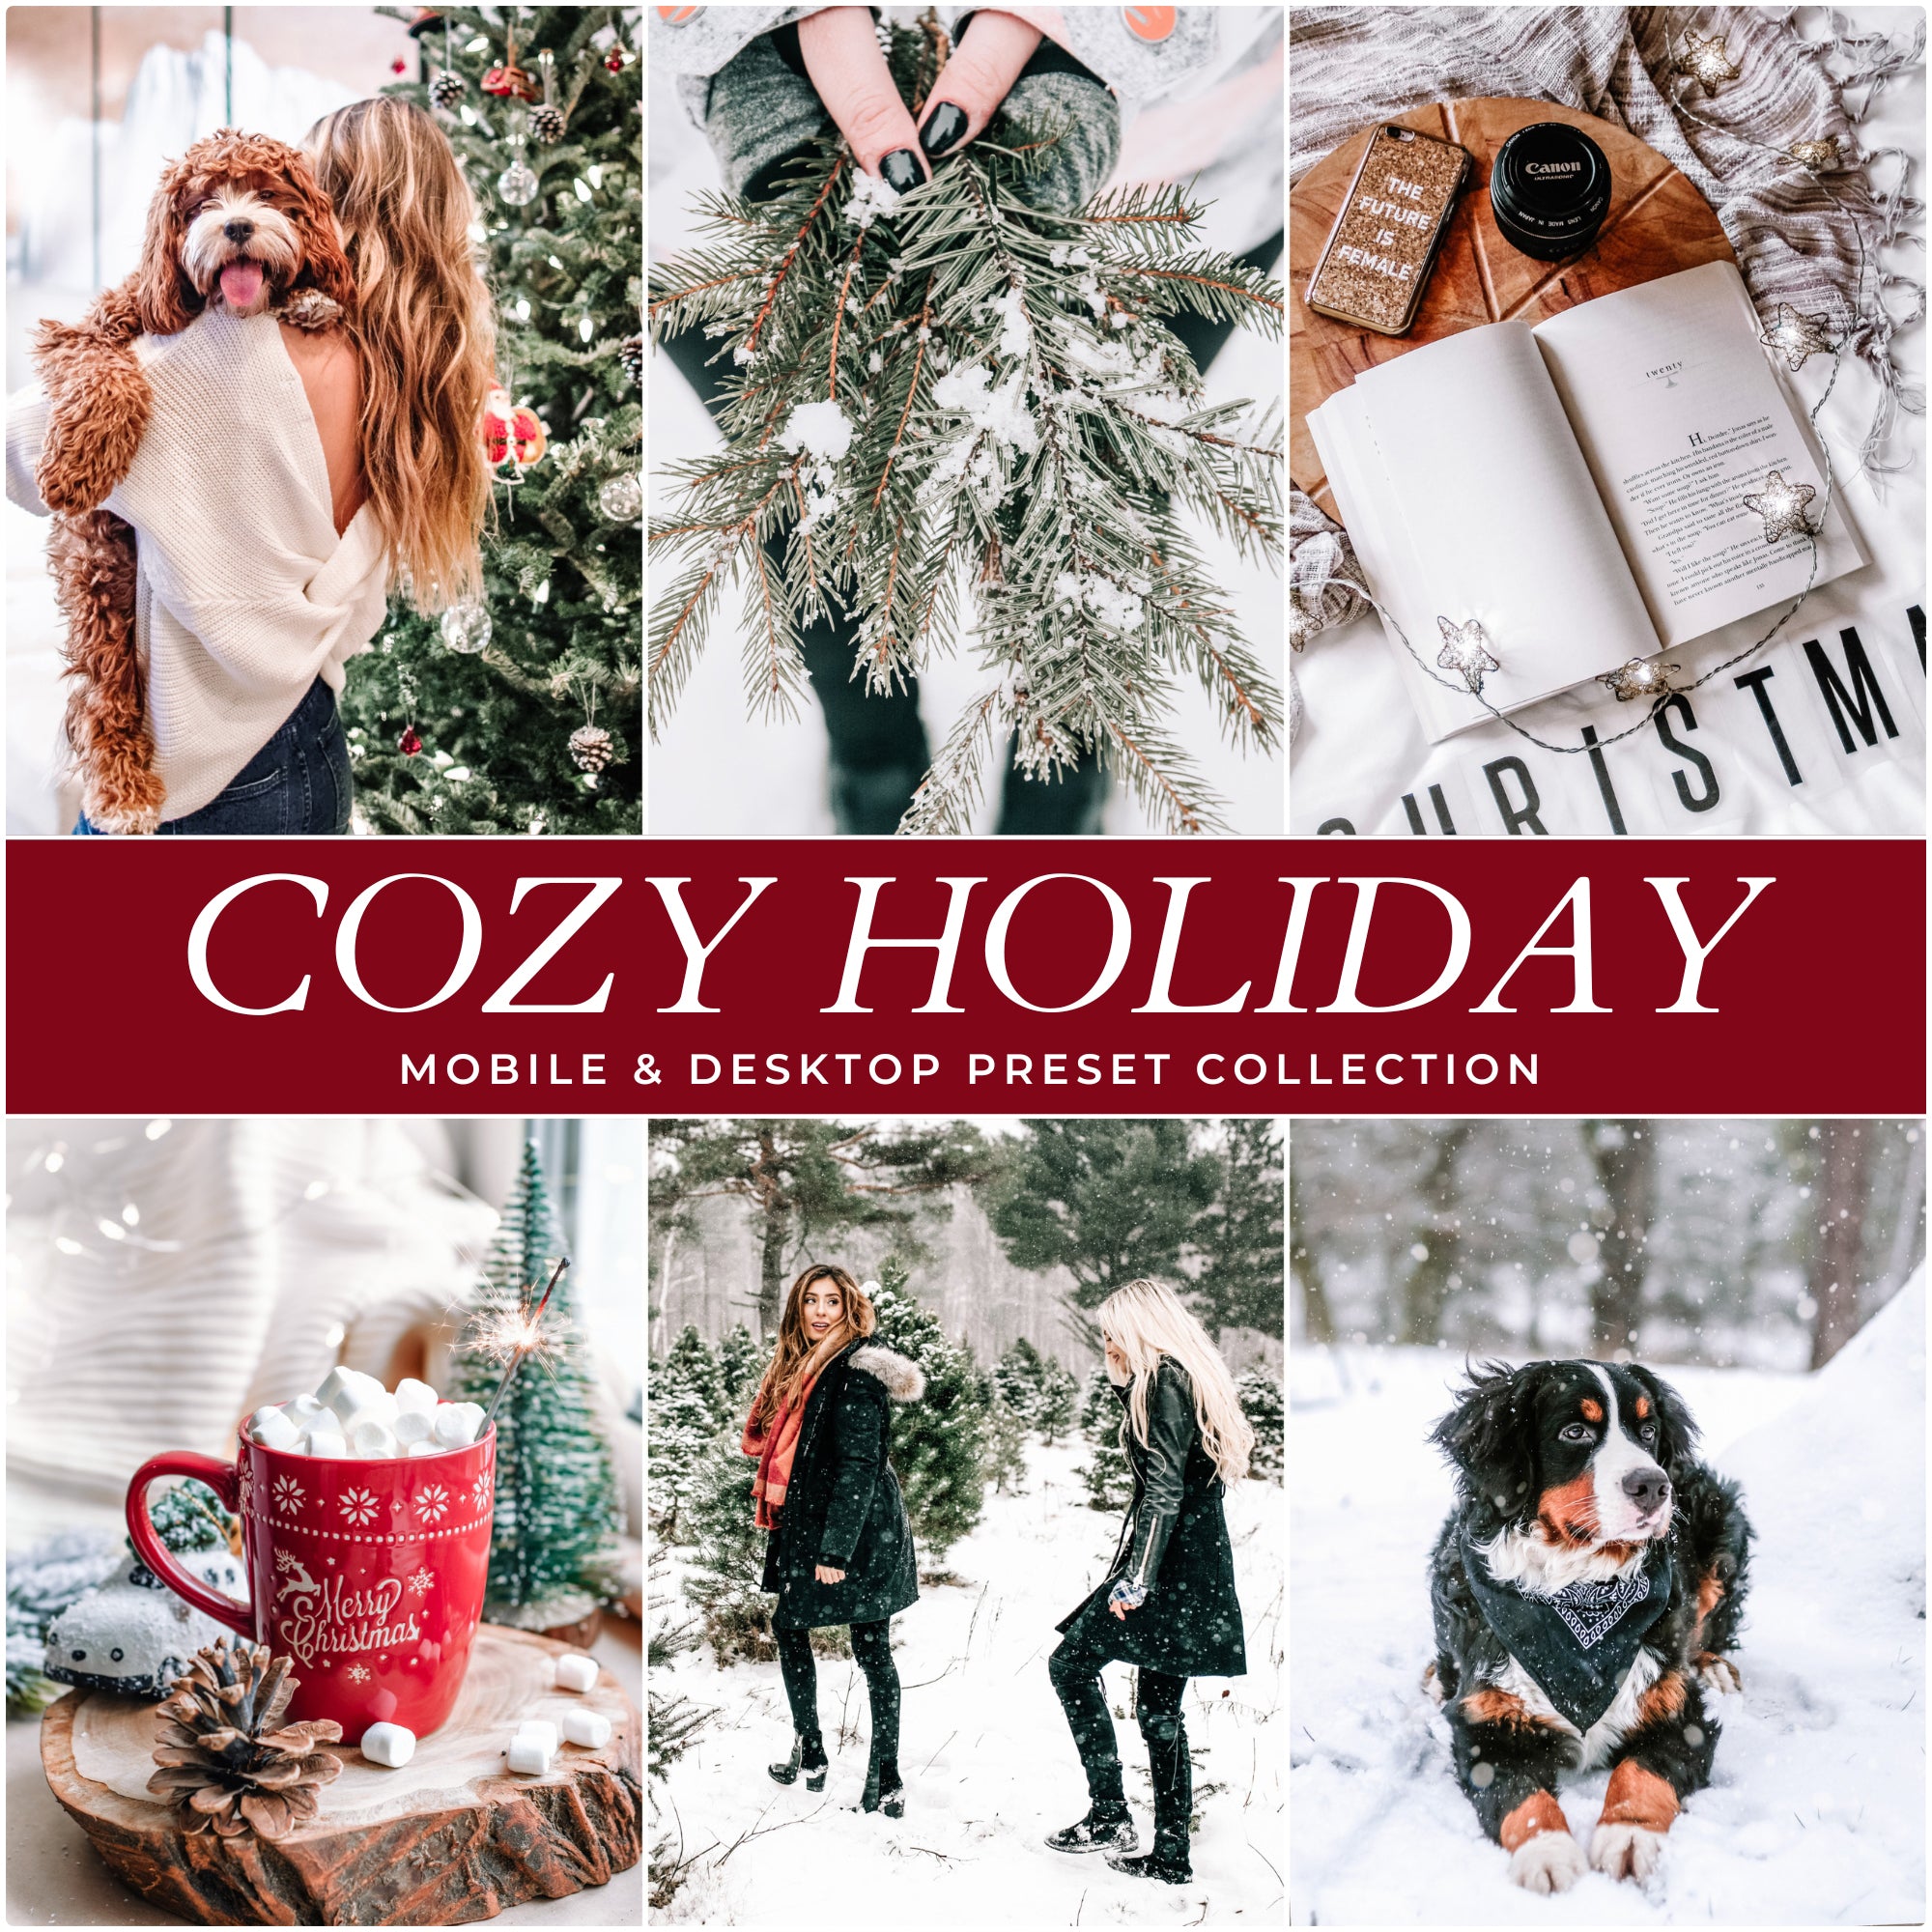 Cozy Holiday Christmas Lightroom Presets The Best Instagram Influencer and Blogger Presets by Lou And marks Presets